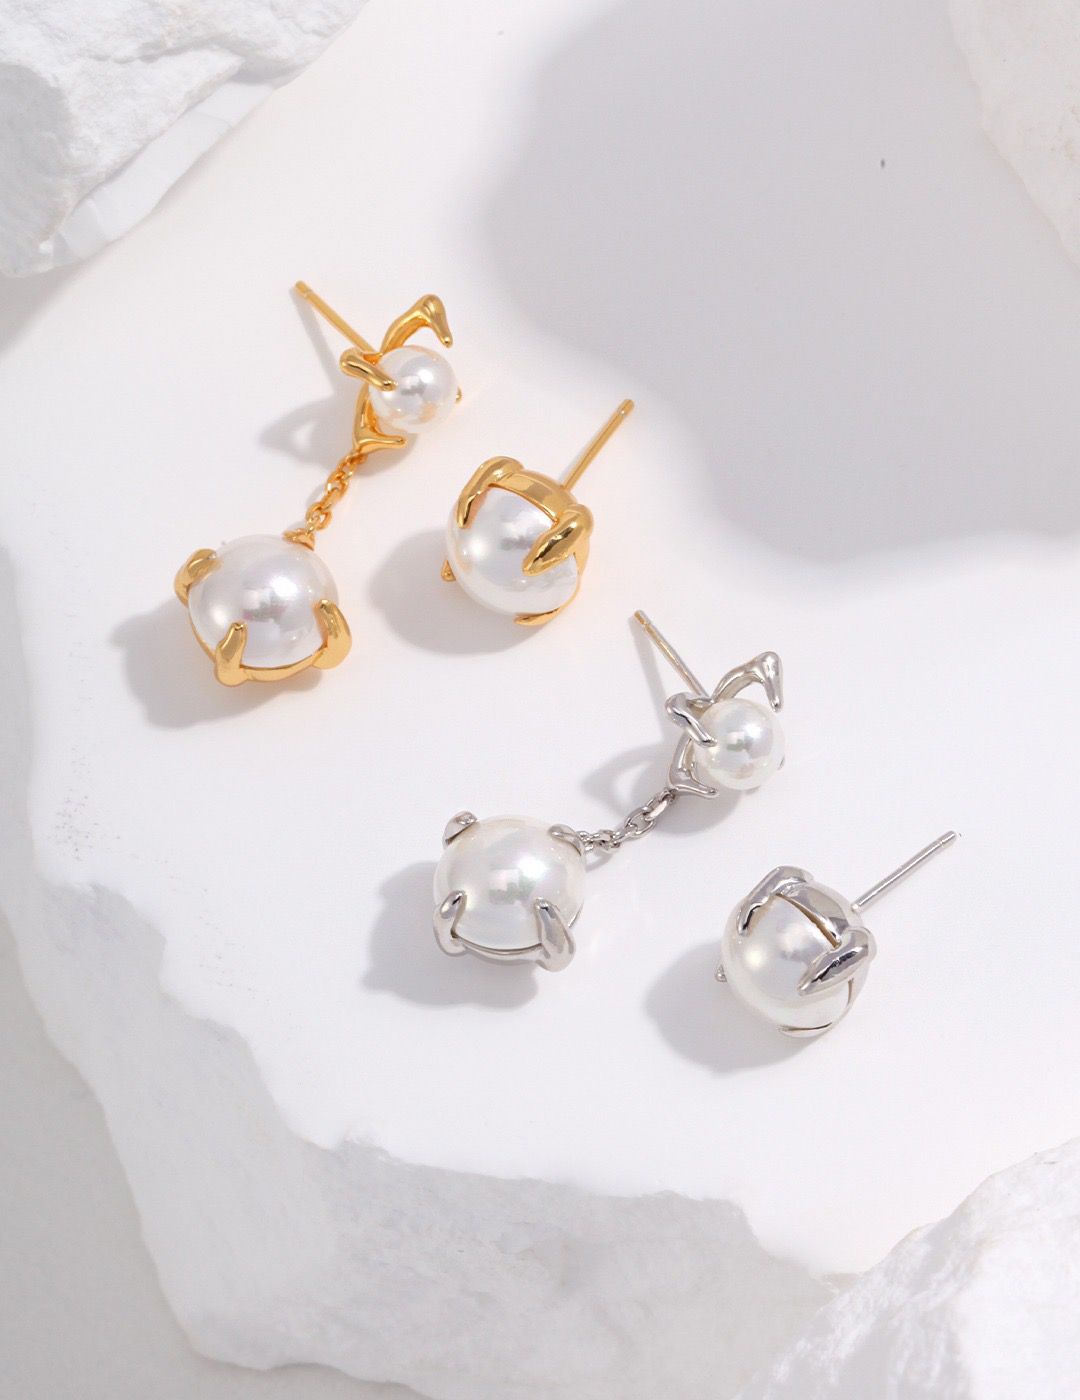 Close-up of Pure Pearl Elegance handcrafted pearl earrings, featuring lustrous white pearls set in a sterling silver or gold-plated backing. The earrings have a classic design and embody timeless elegance, making them a versatile accessory for any occasion.